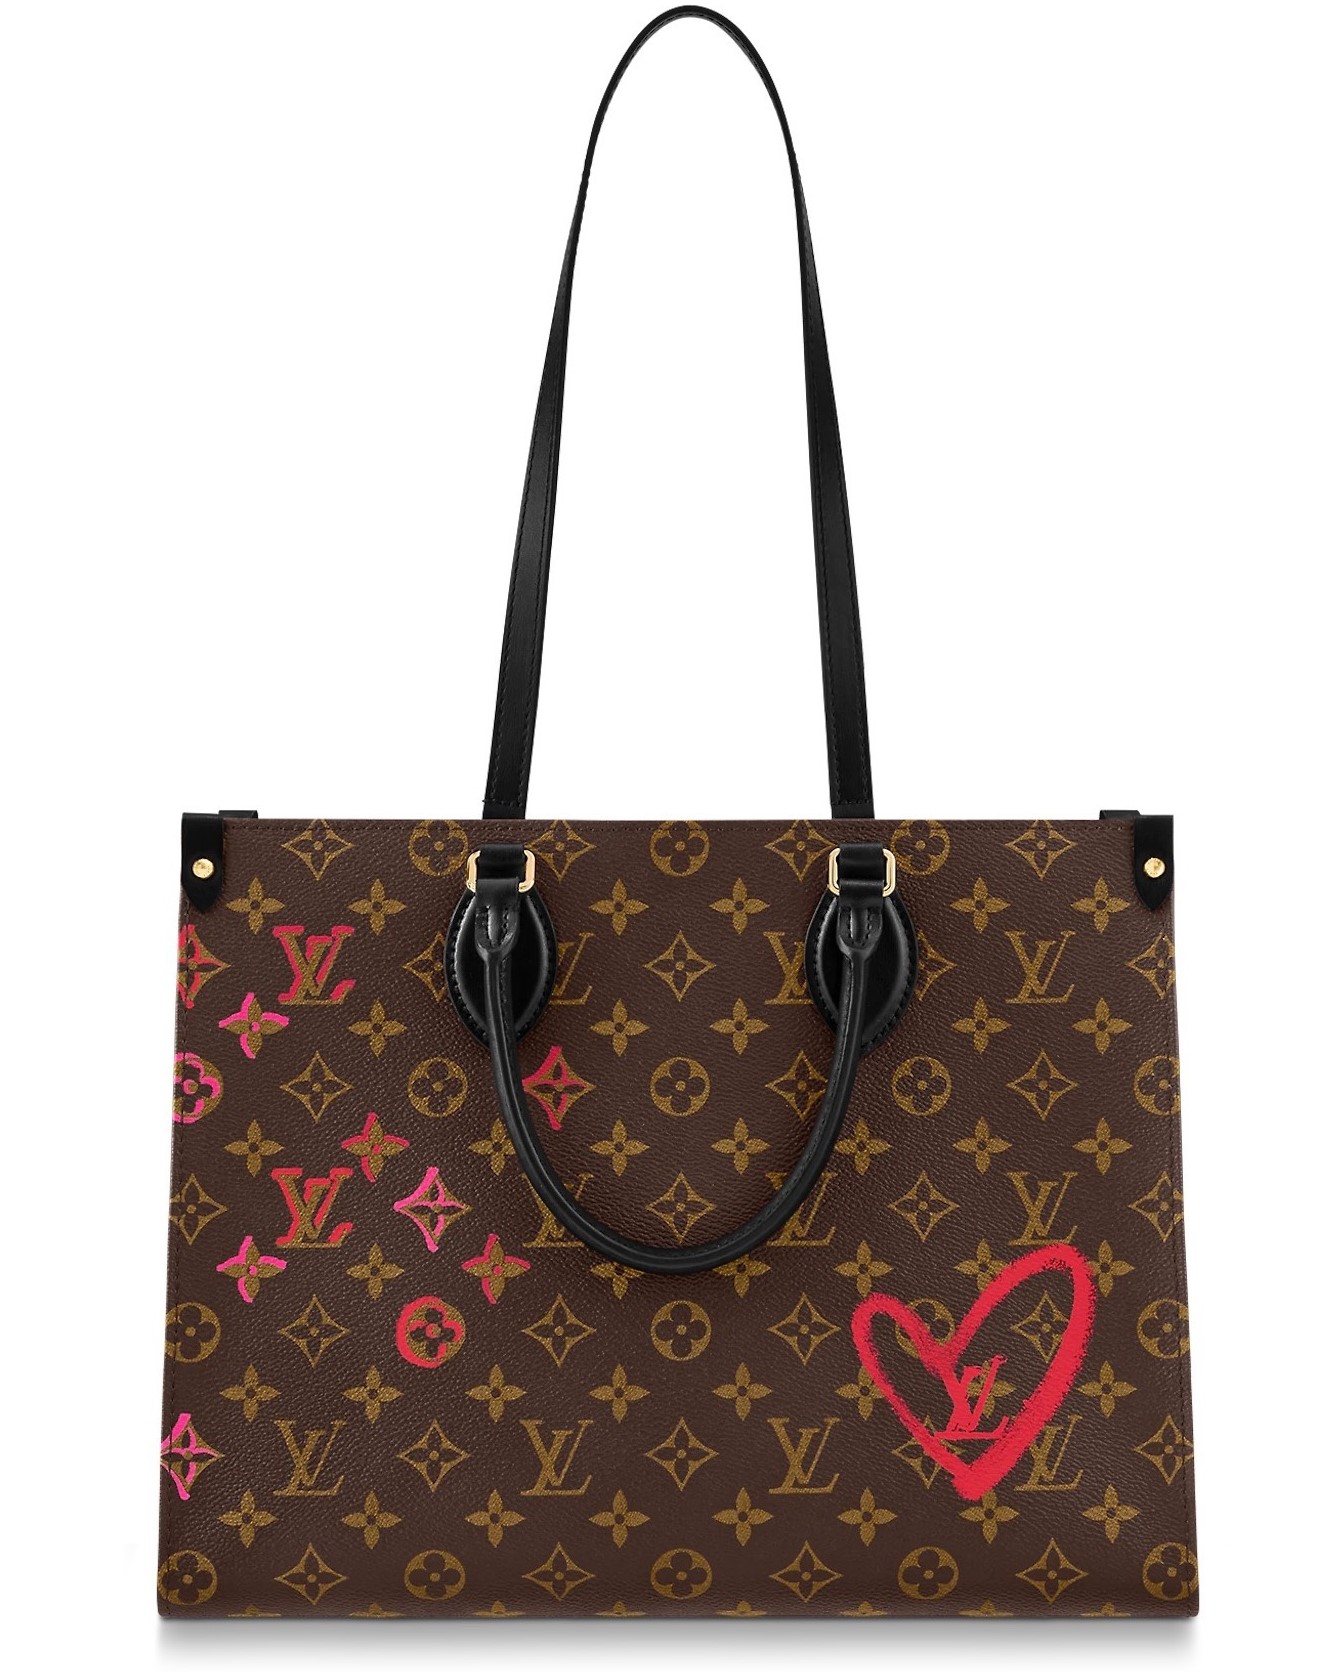 TÚI XÁCH NỮ LOUIS VUITTON LV TOTE ONTHEGO LIMITED EDITION FALL IN LOVE MONOGRAM CANVAS MM 5